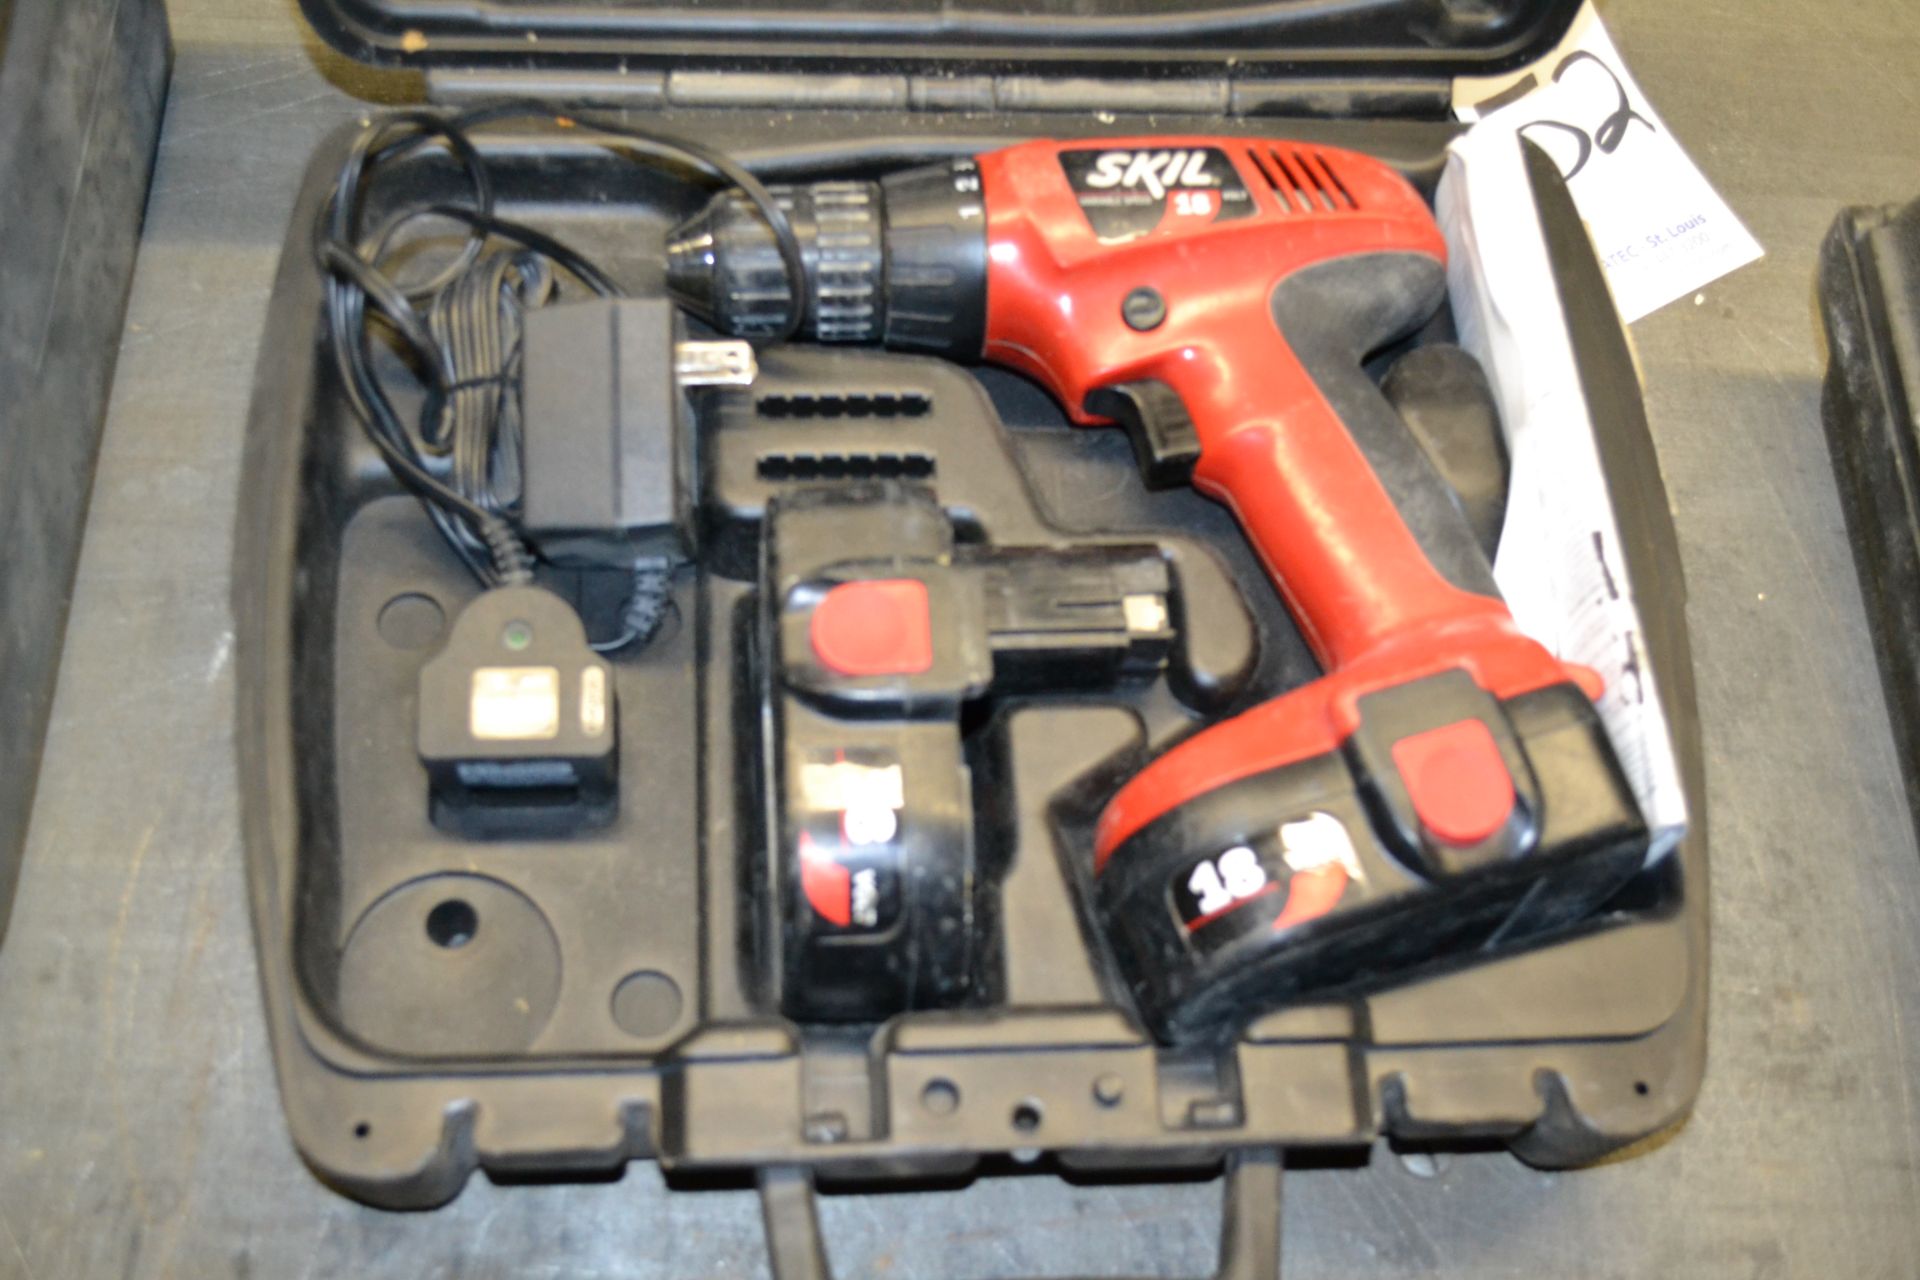 Skil Cordless Drill - Image 2 of 3